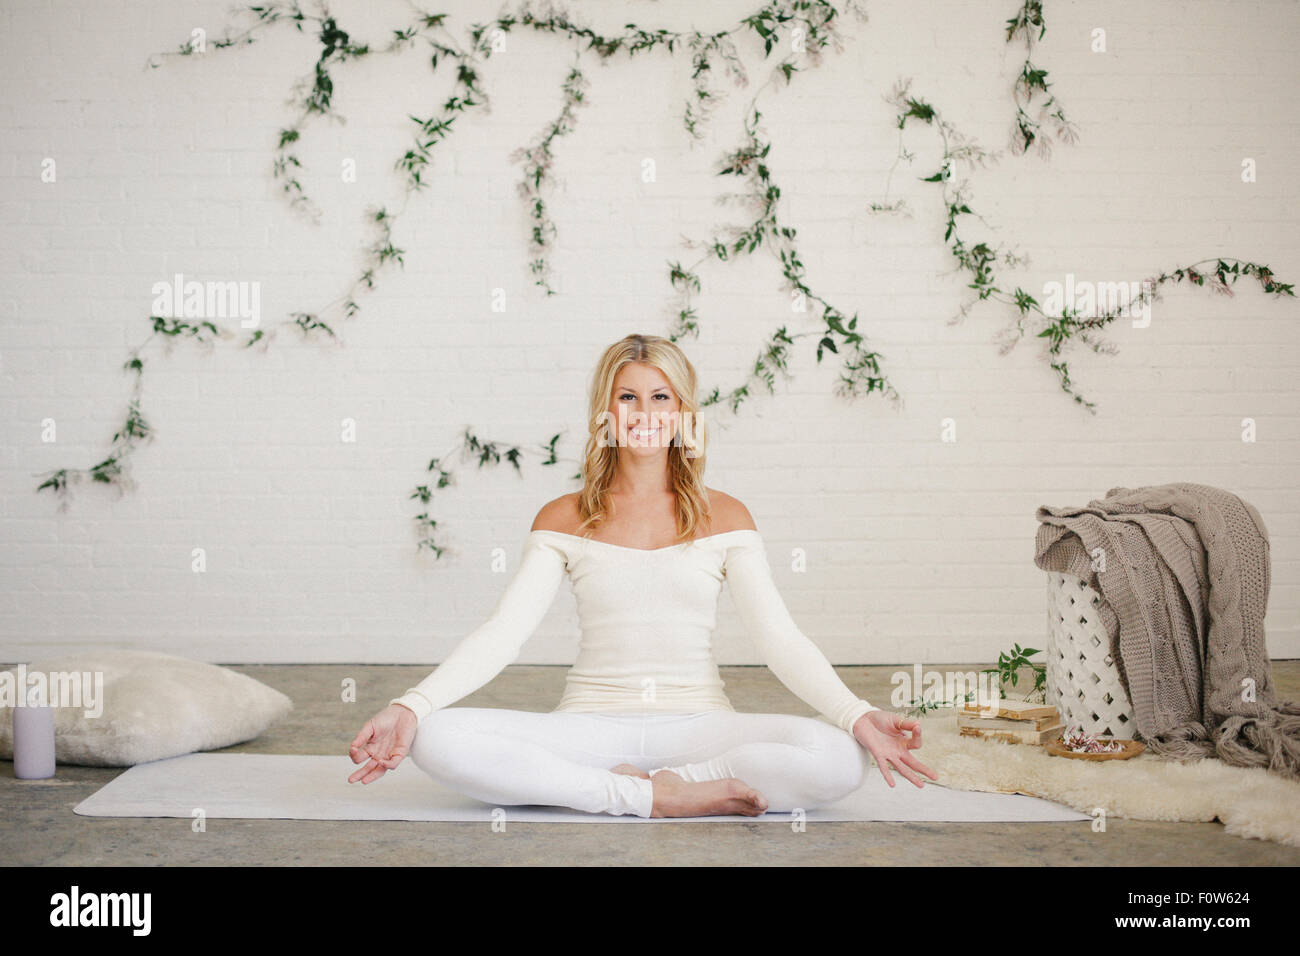 A blonde woman in a white leotard sitting on a white mat in a room, doing yoga. A creeper plant on the wall behind her. Stock Photo